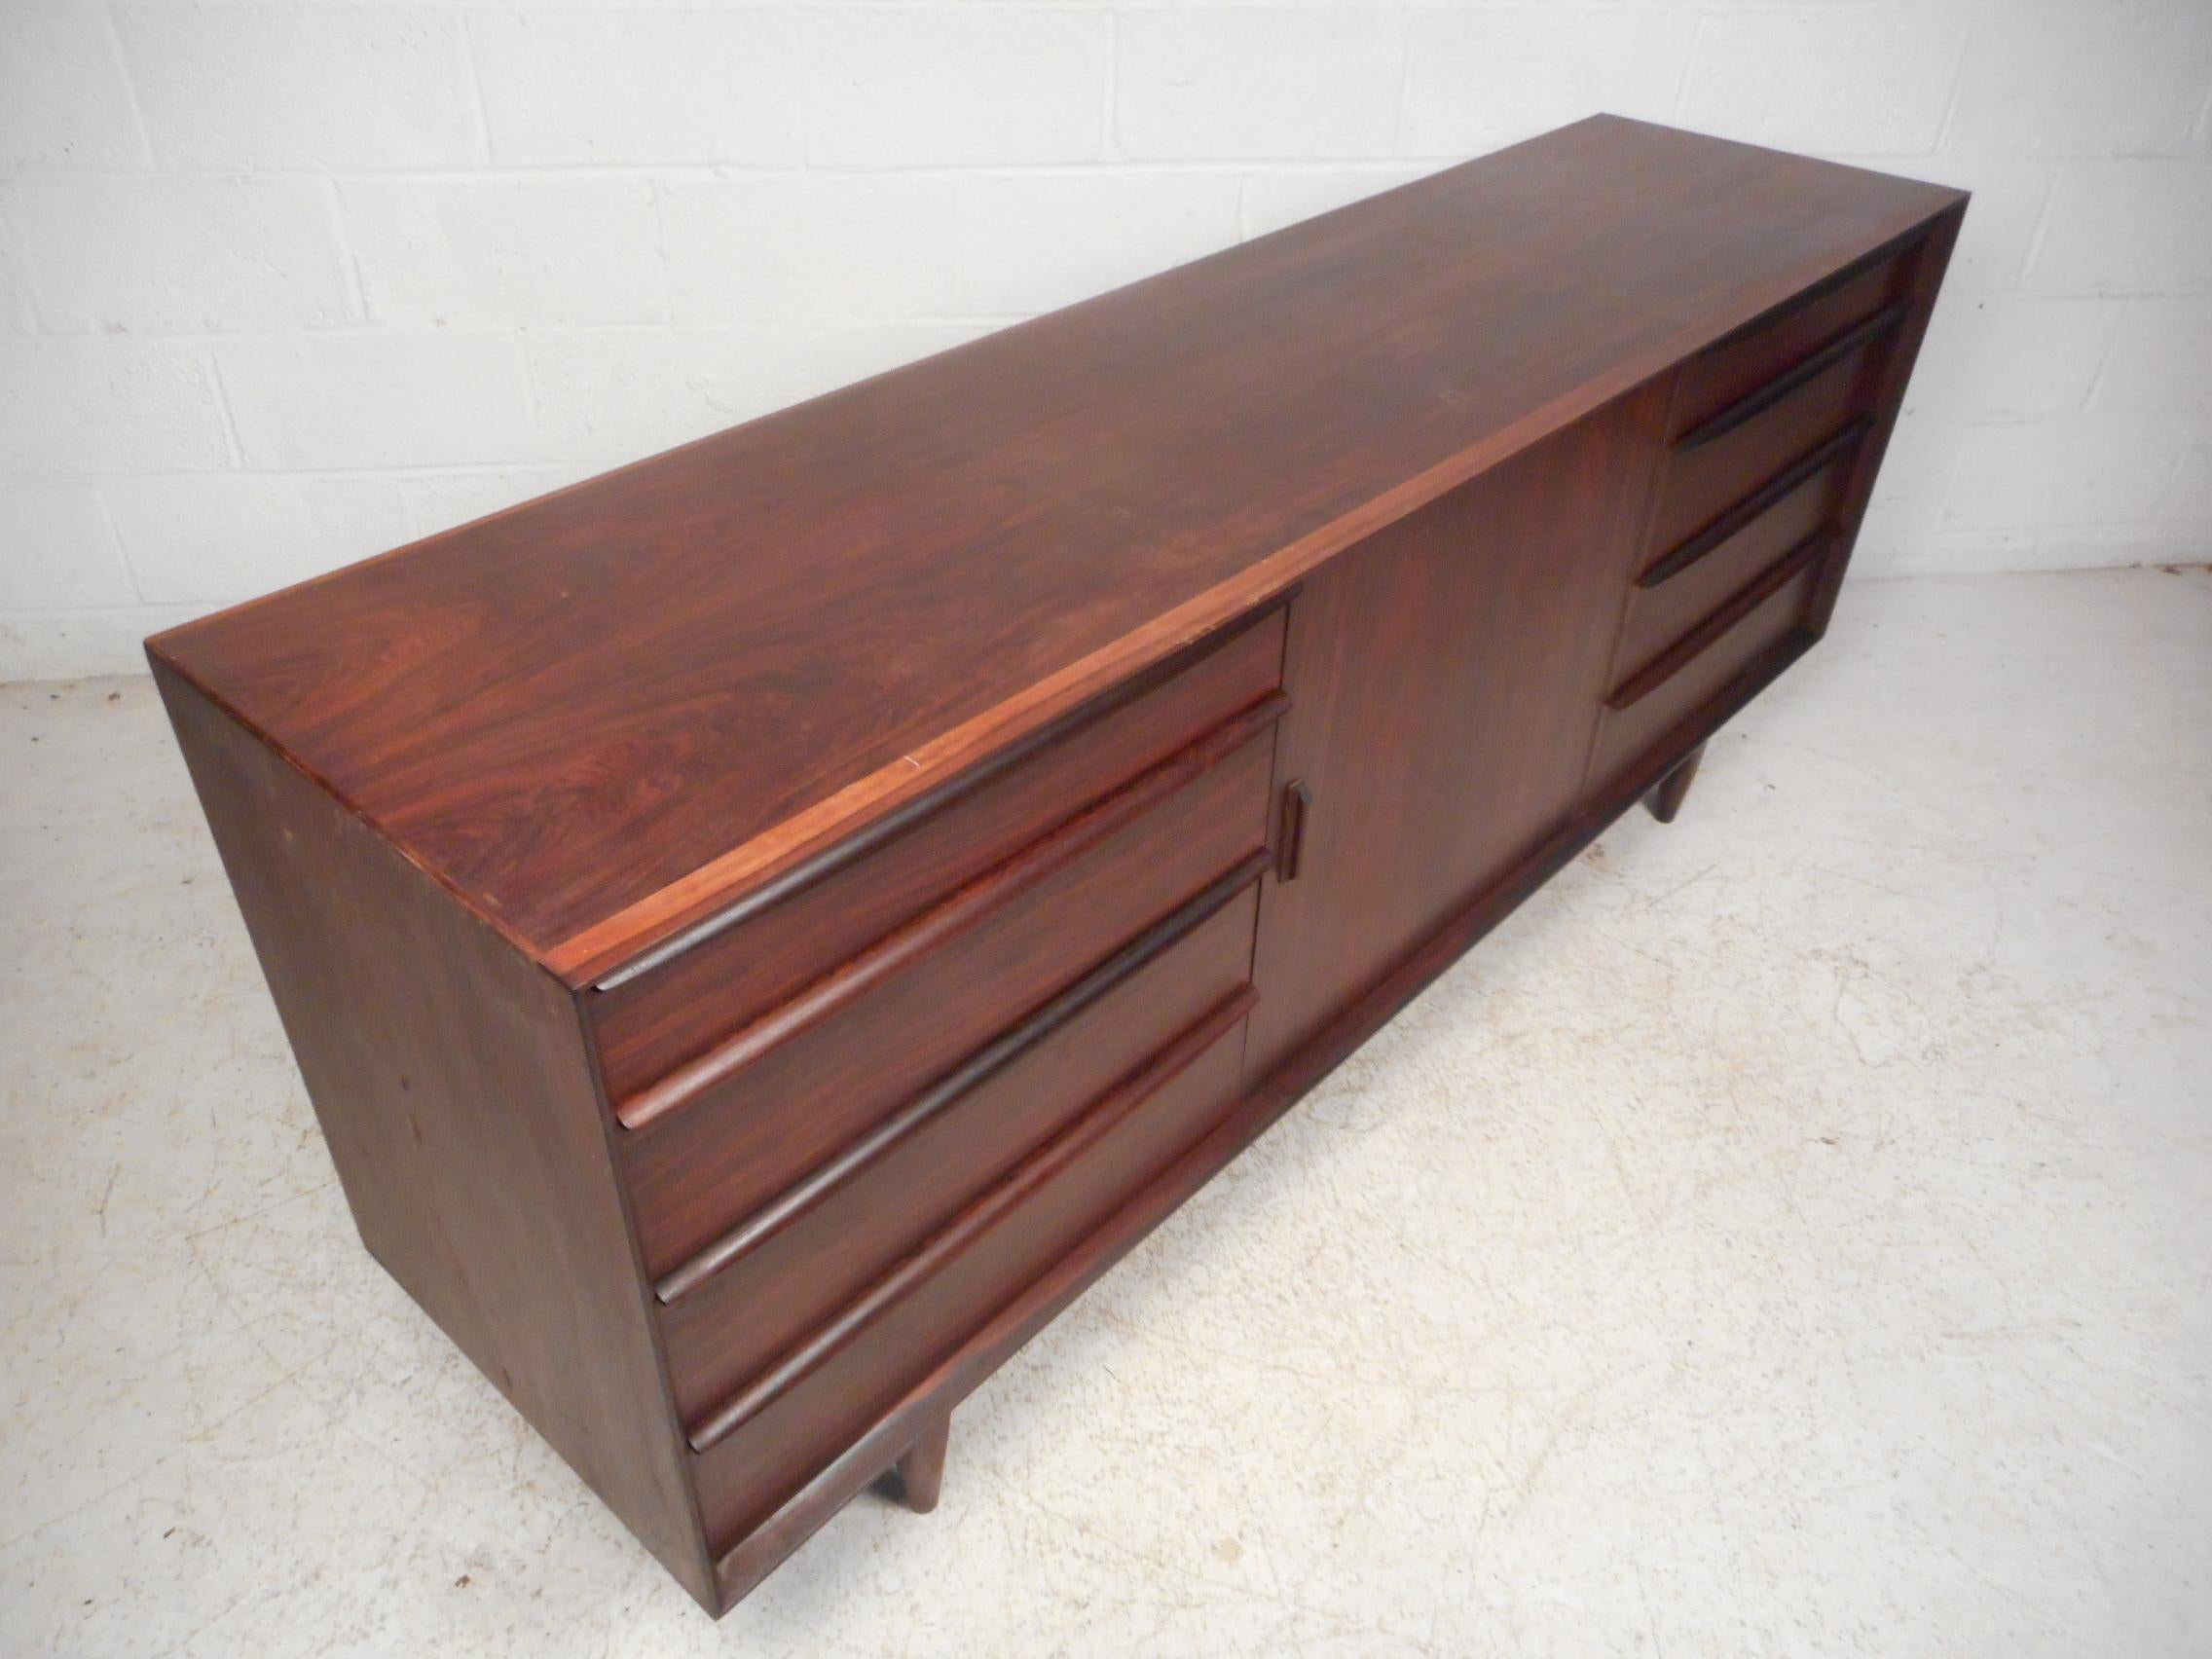 Impressive midcentury sideboard with a beautiful rosewood construction with a dark finish. Ample storage space, with compartments within allowing for sorting and filing of drawer's contents. A finished back allows this sideboard/server to be